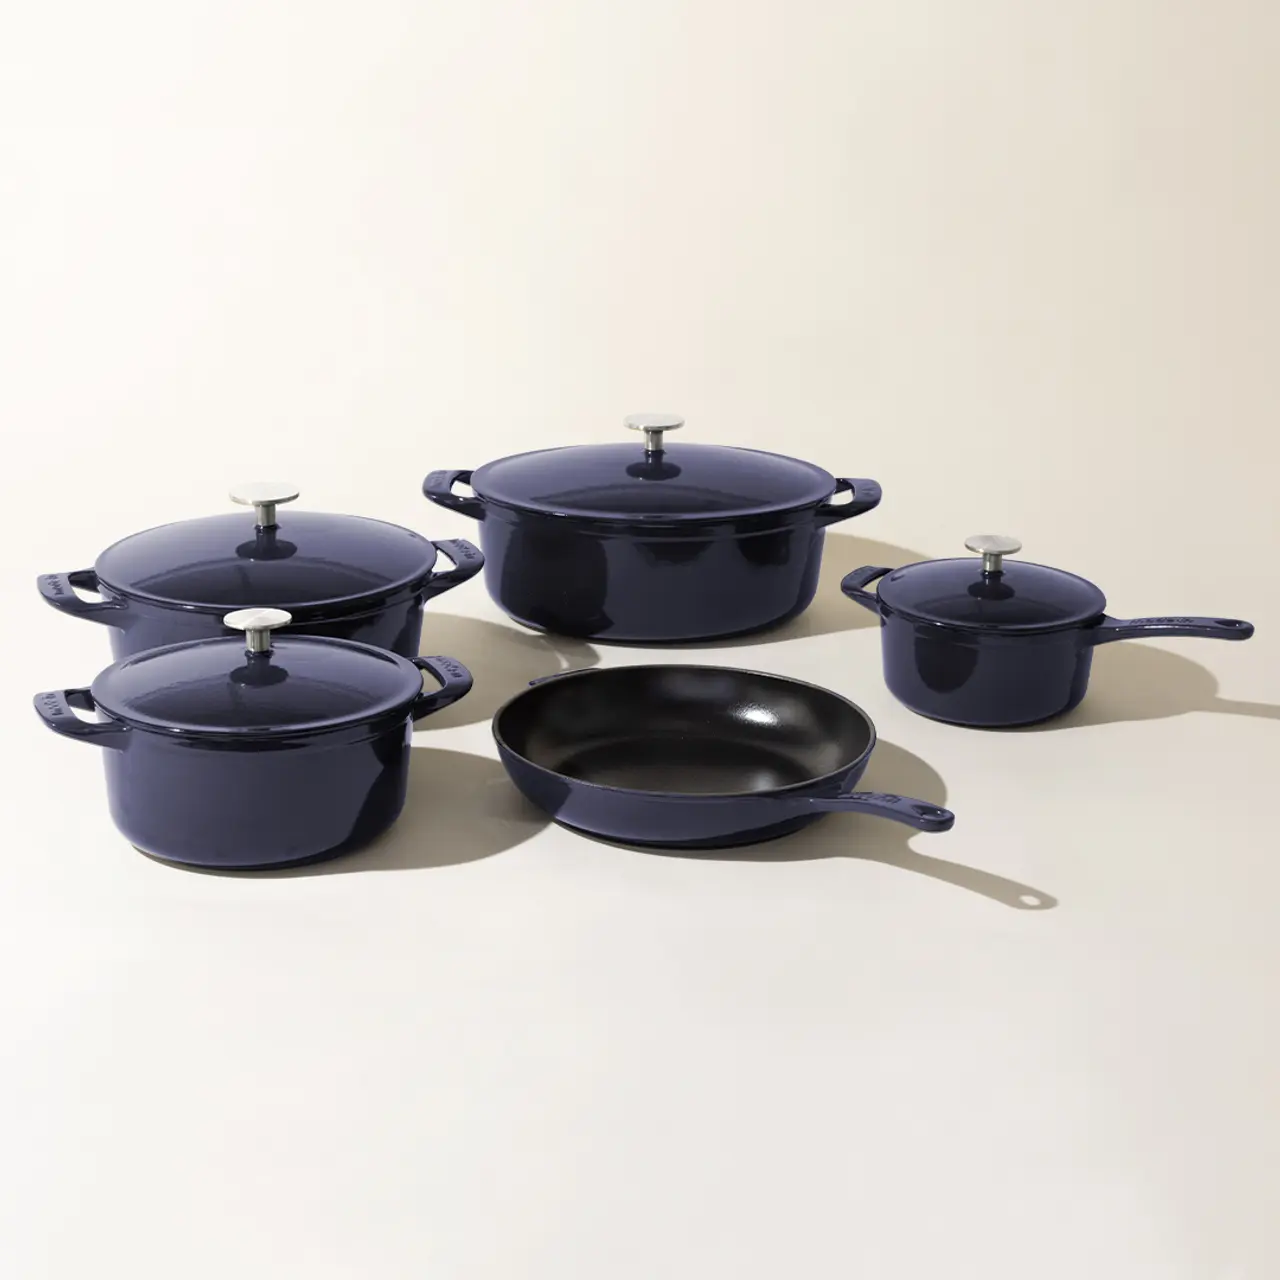 A set of matching navy blue cookware, including pots with lids and a frying pan, displayed on a neutral background.